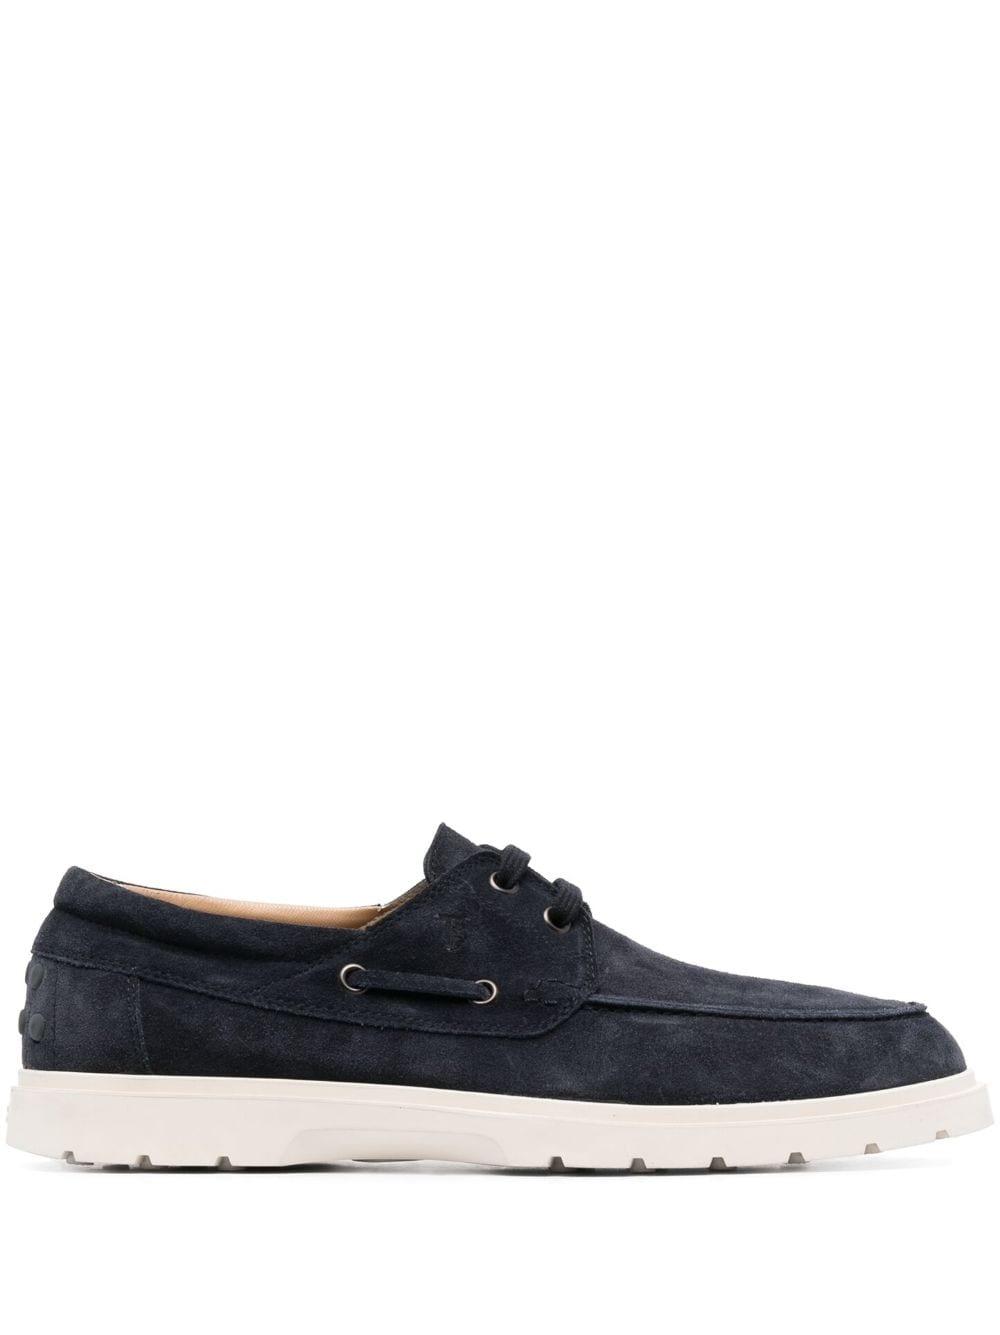 suede boat shoes - 1